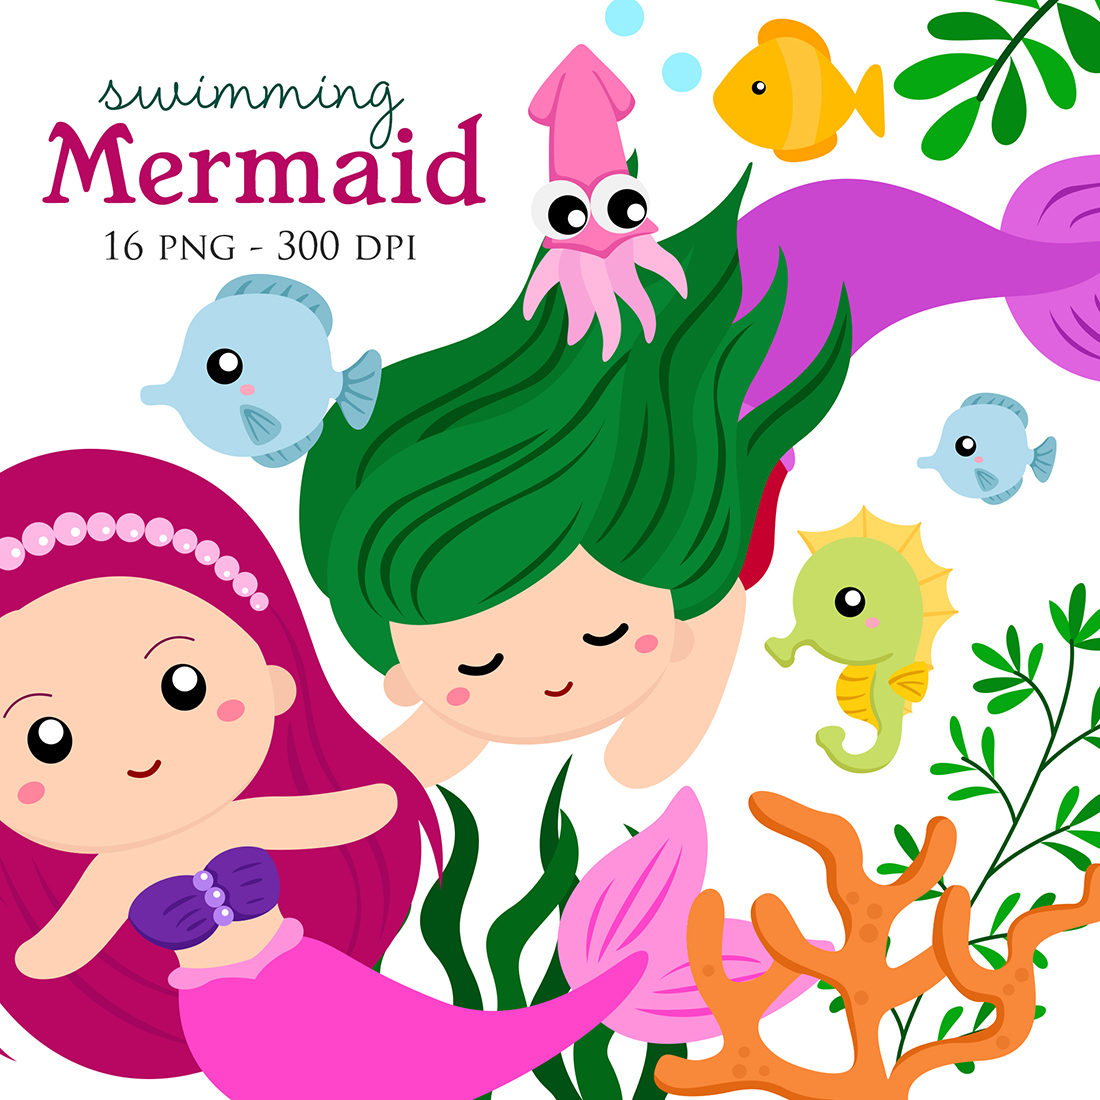 Pink Swimming Mermaid Cute Girl and Sea Animals Illustration Vector Clipart Cartoon cover image.